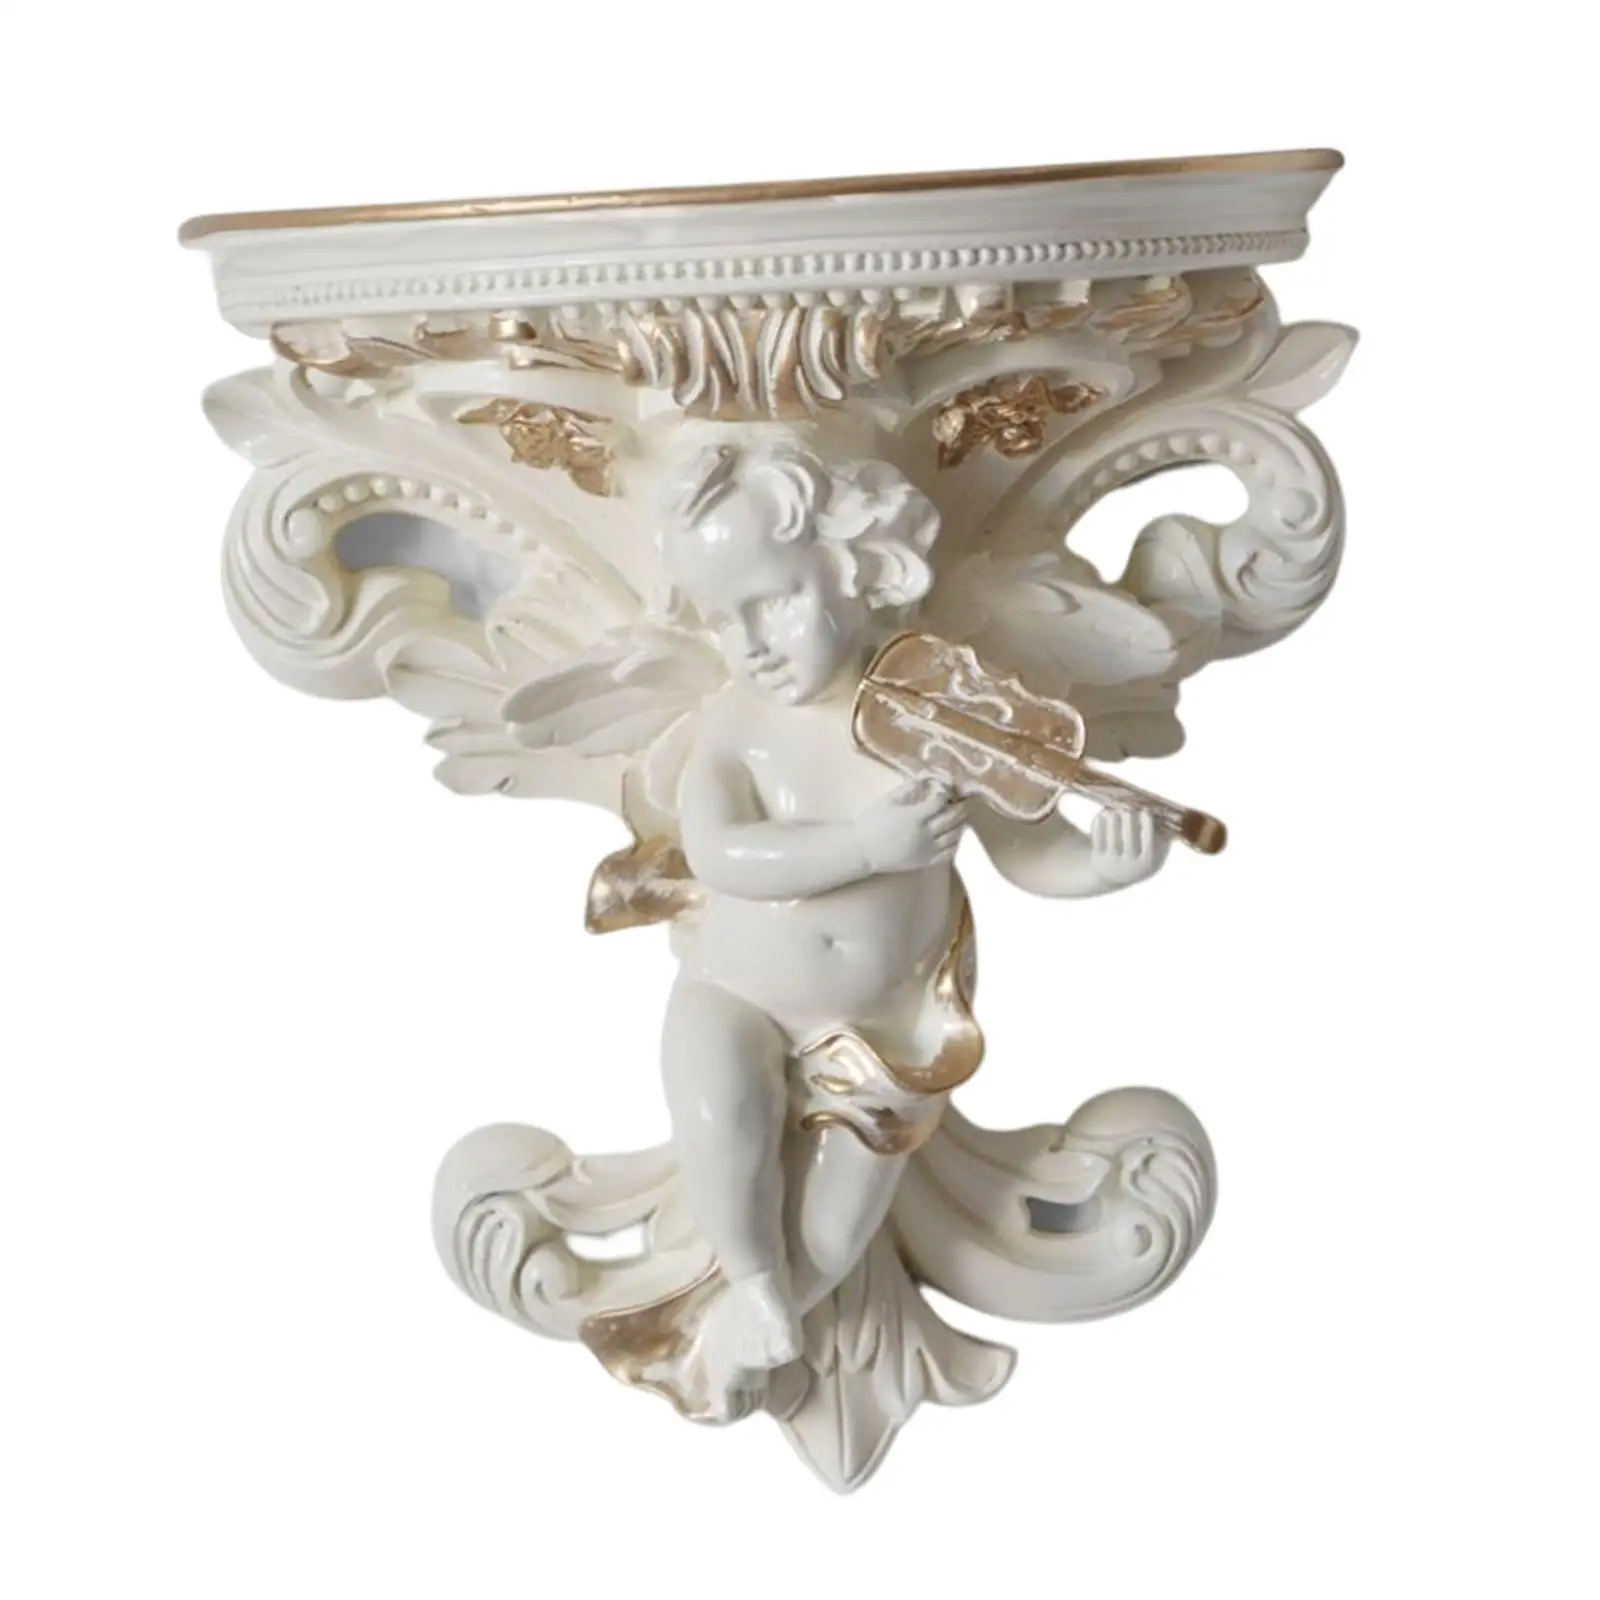 Decorative Wall Floating Shelf Angel Statue Wall Mount Display Resin Holder Craft Artwork for Office Home wall Decoration